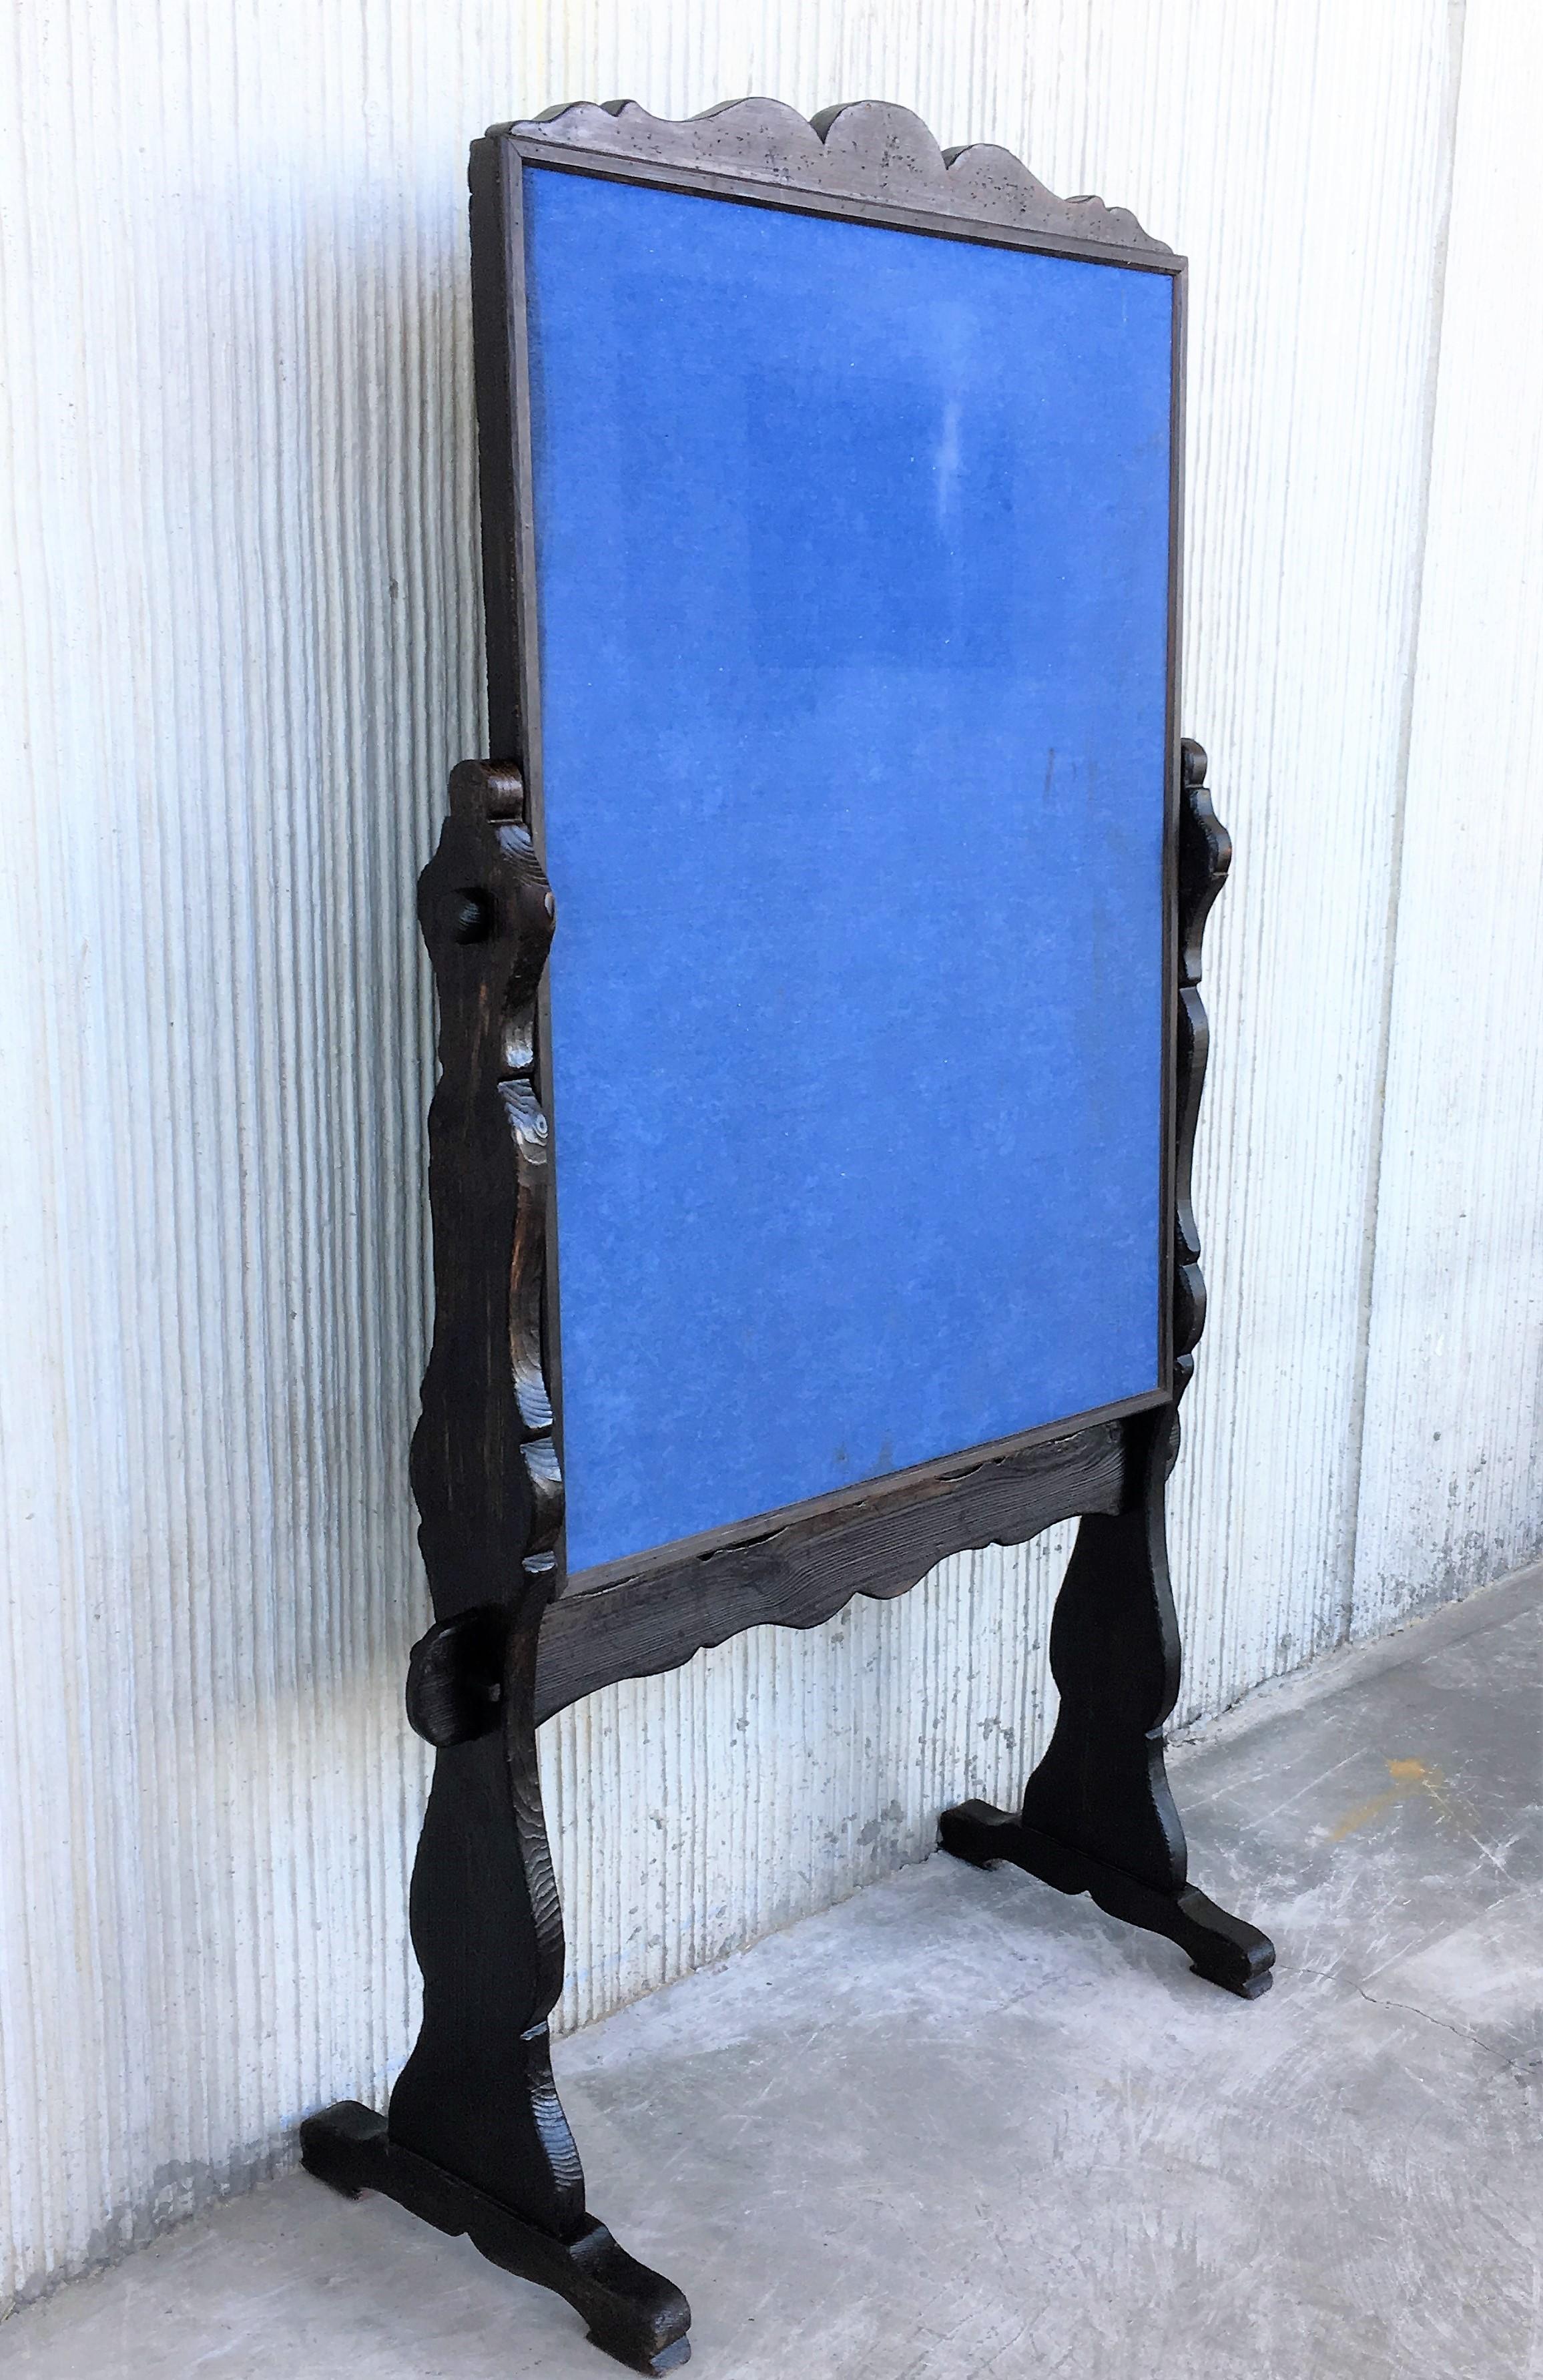 20th century French bulletin board with lyre legs.
Blue felt for stick notes.